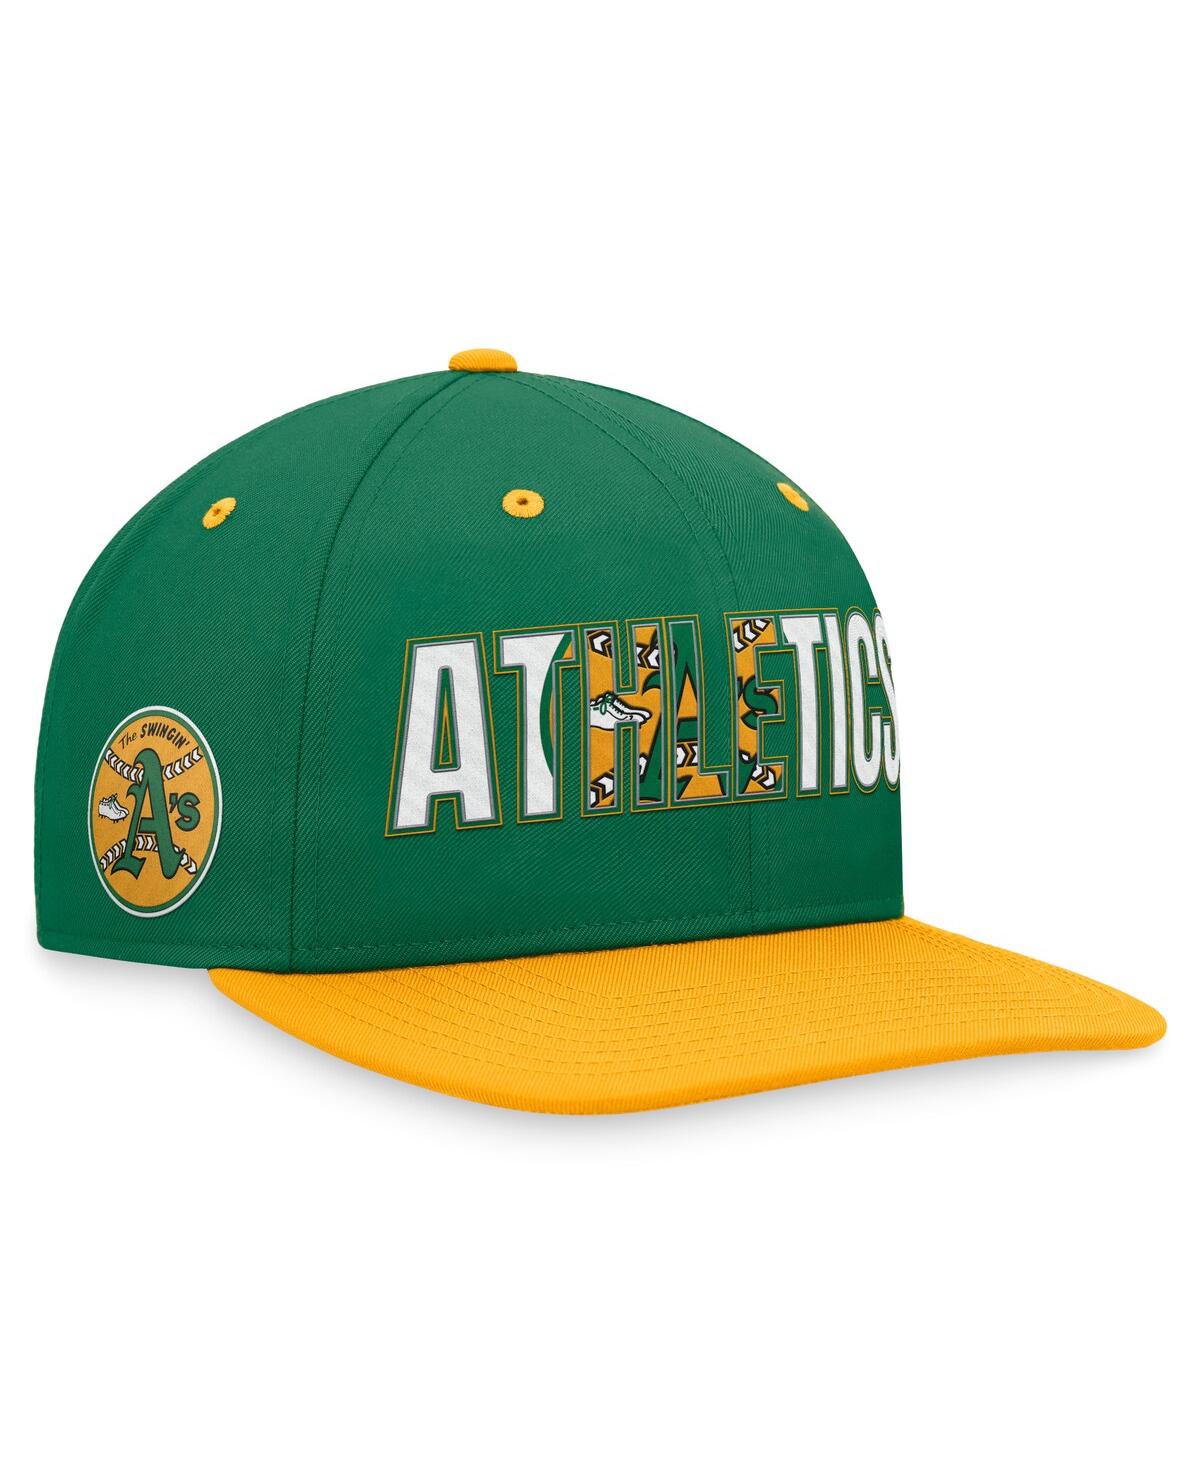 Nike Men's  Green Oakland Athletics Cooperstown Collection Pro Snapback Hat